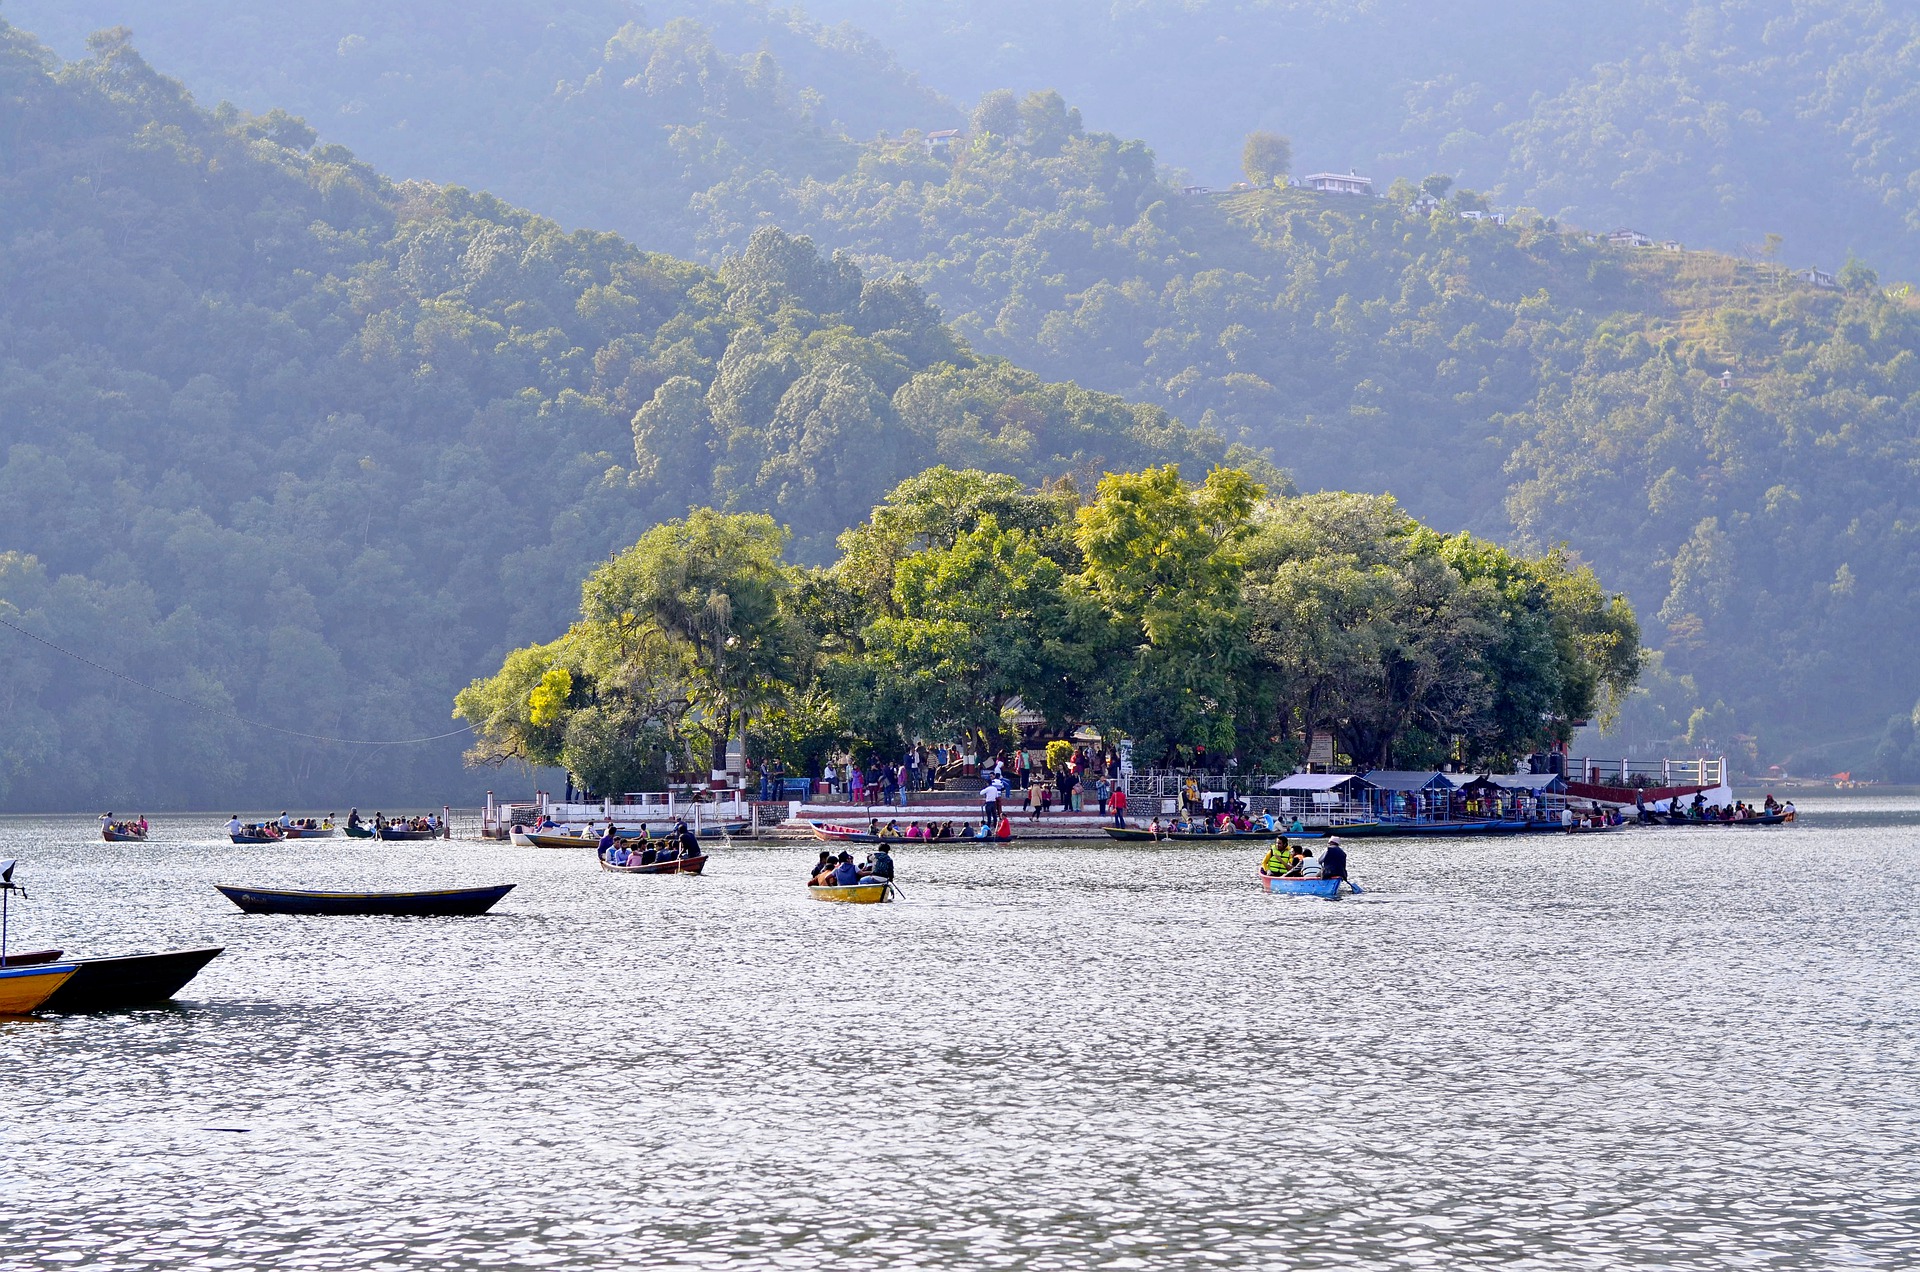 Pokhara Sightseeing full of interesting places to visit